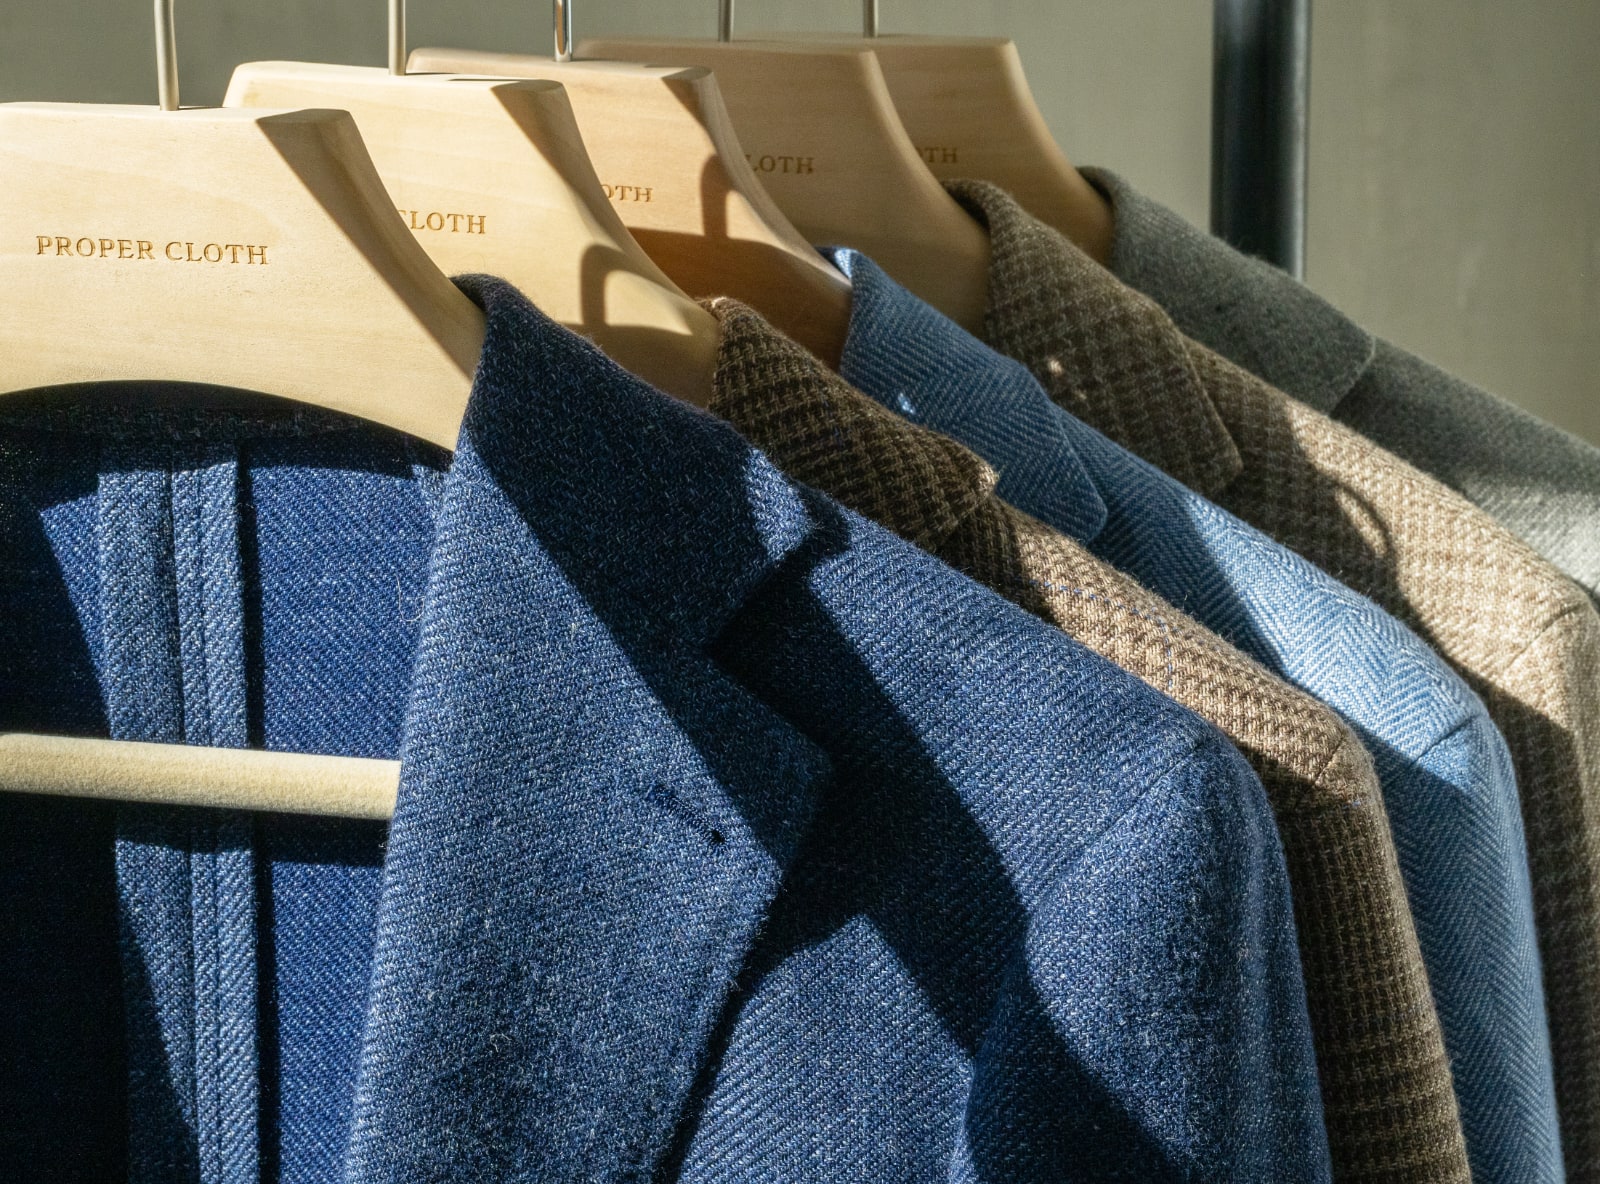 Proper Cloth, New Unstructured Jackets.